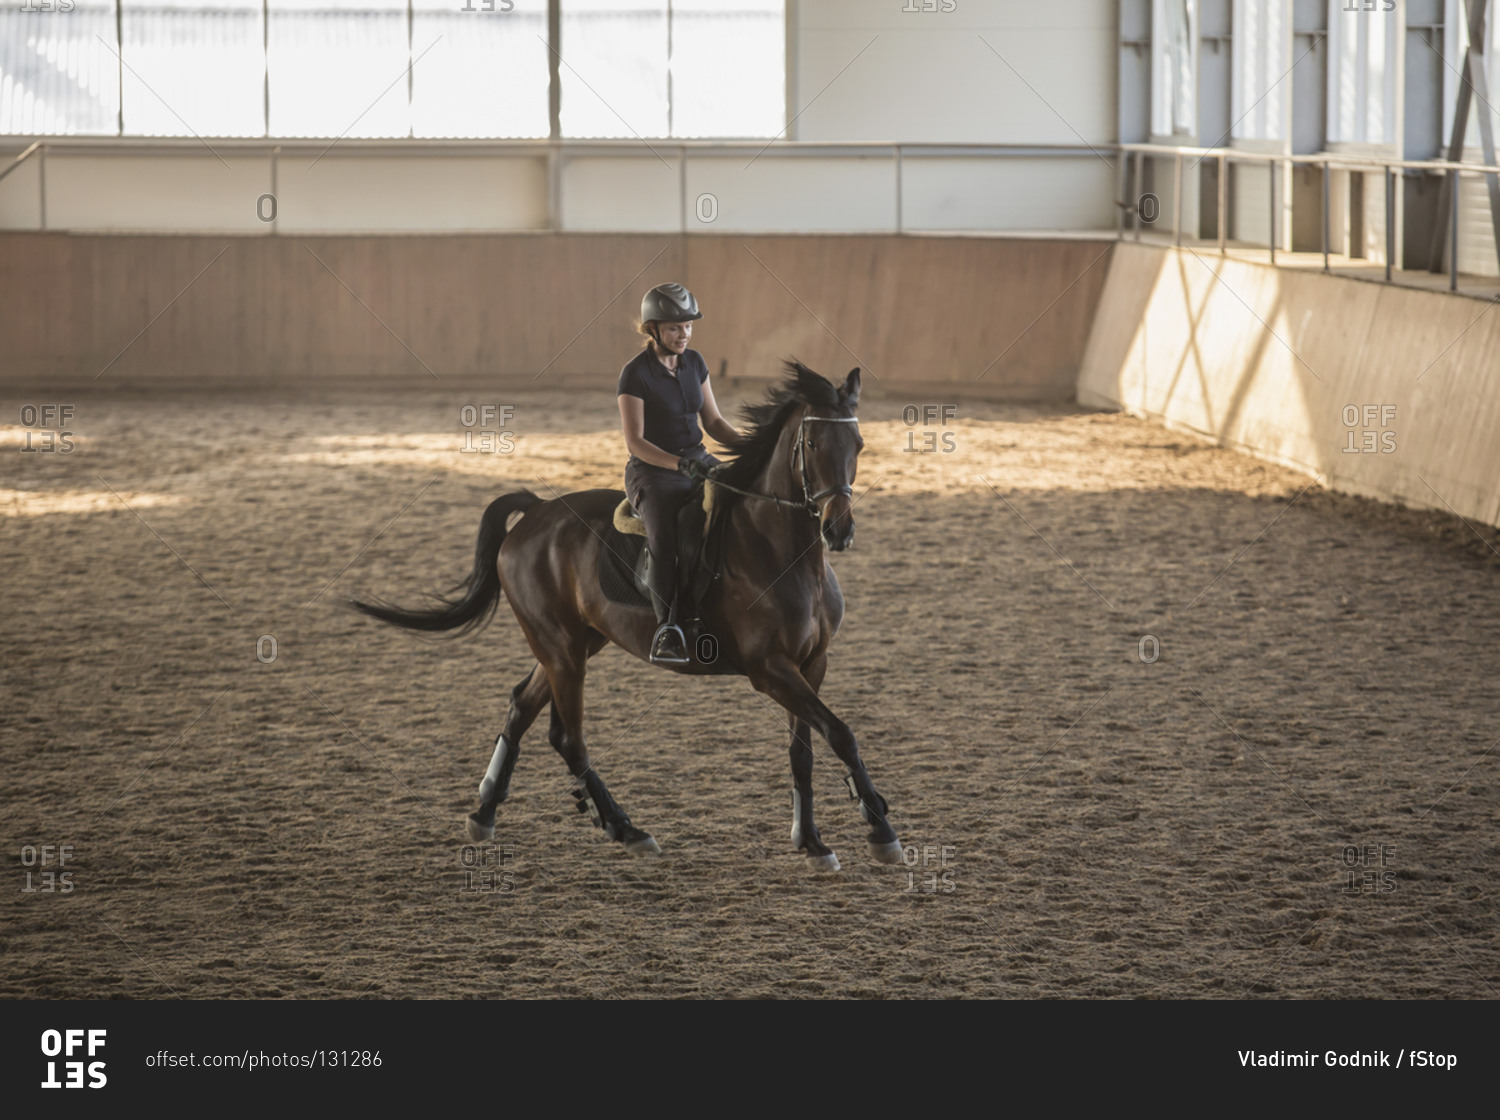 Woman riding horse in training stable